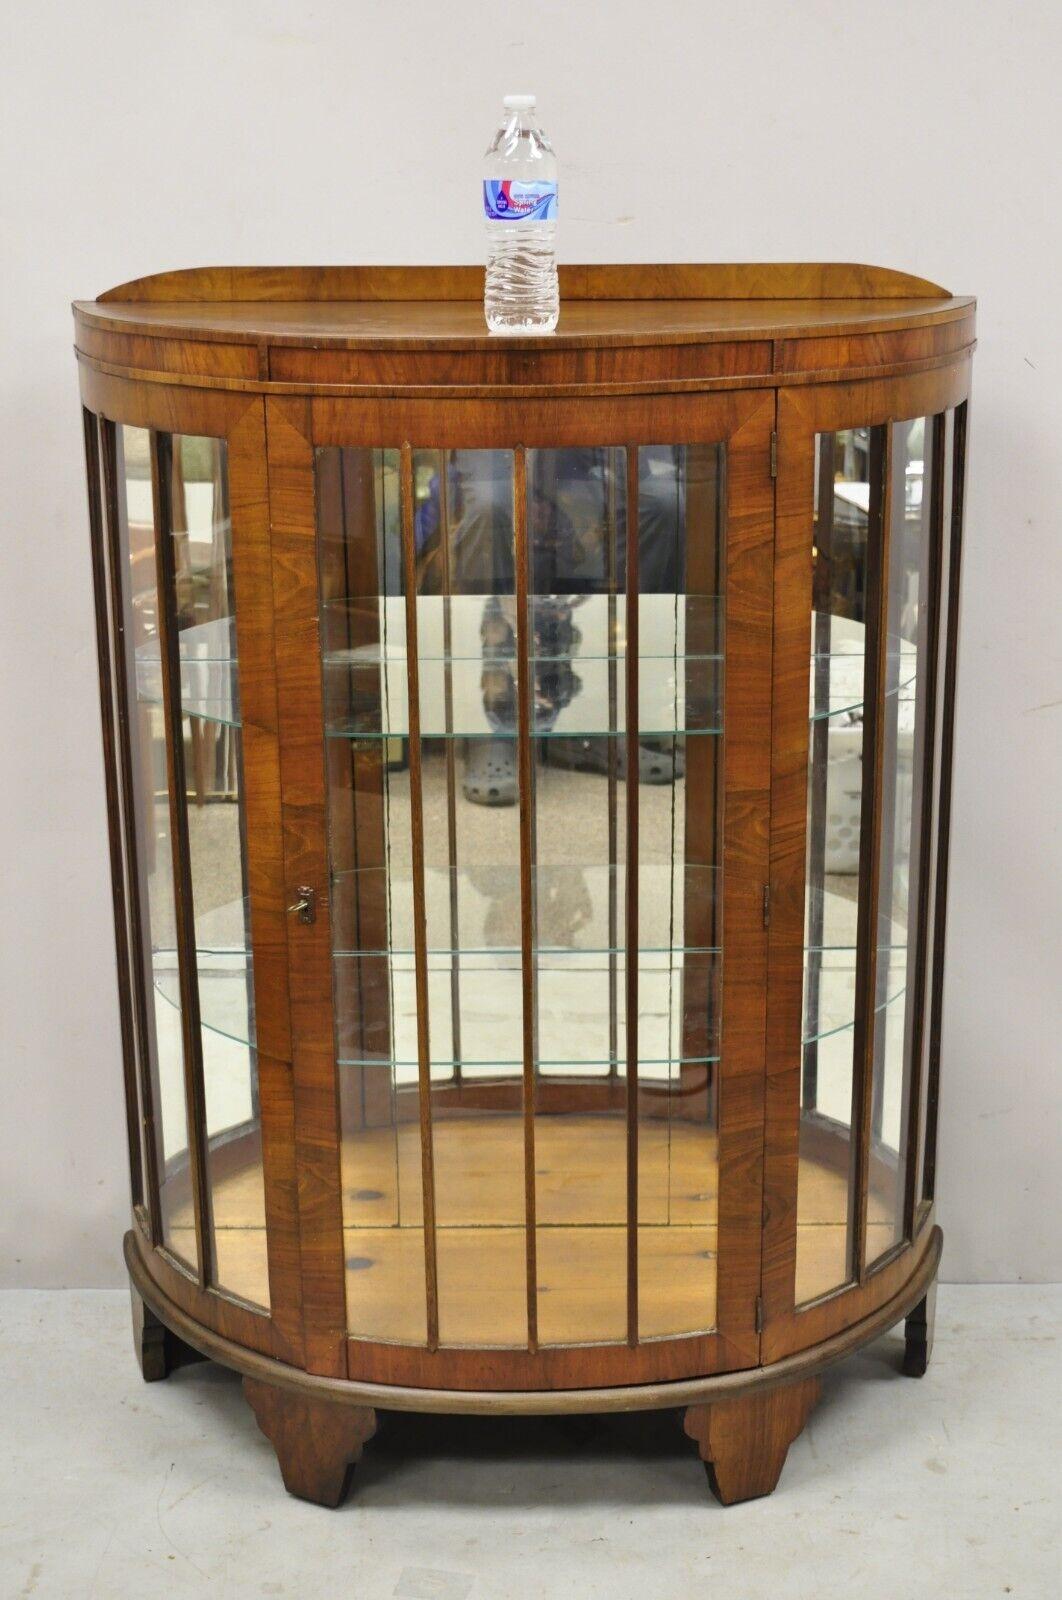 Antique Art Deco small half round demilune walnut Curio display cabinet. Item features mirrored backing, half round demilune form, beautiful wood grain, 1 swing door, working lock and key, very nice antique item. Circa Early 1900s. Measurements: 48